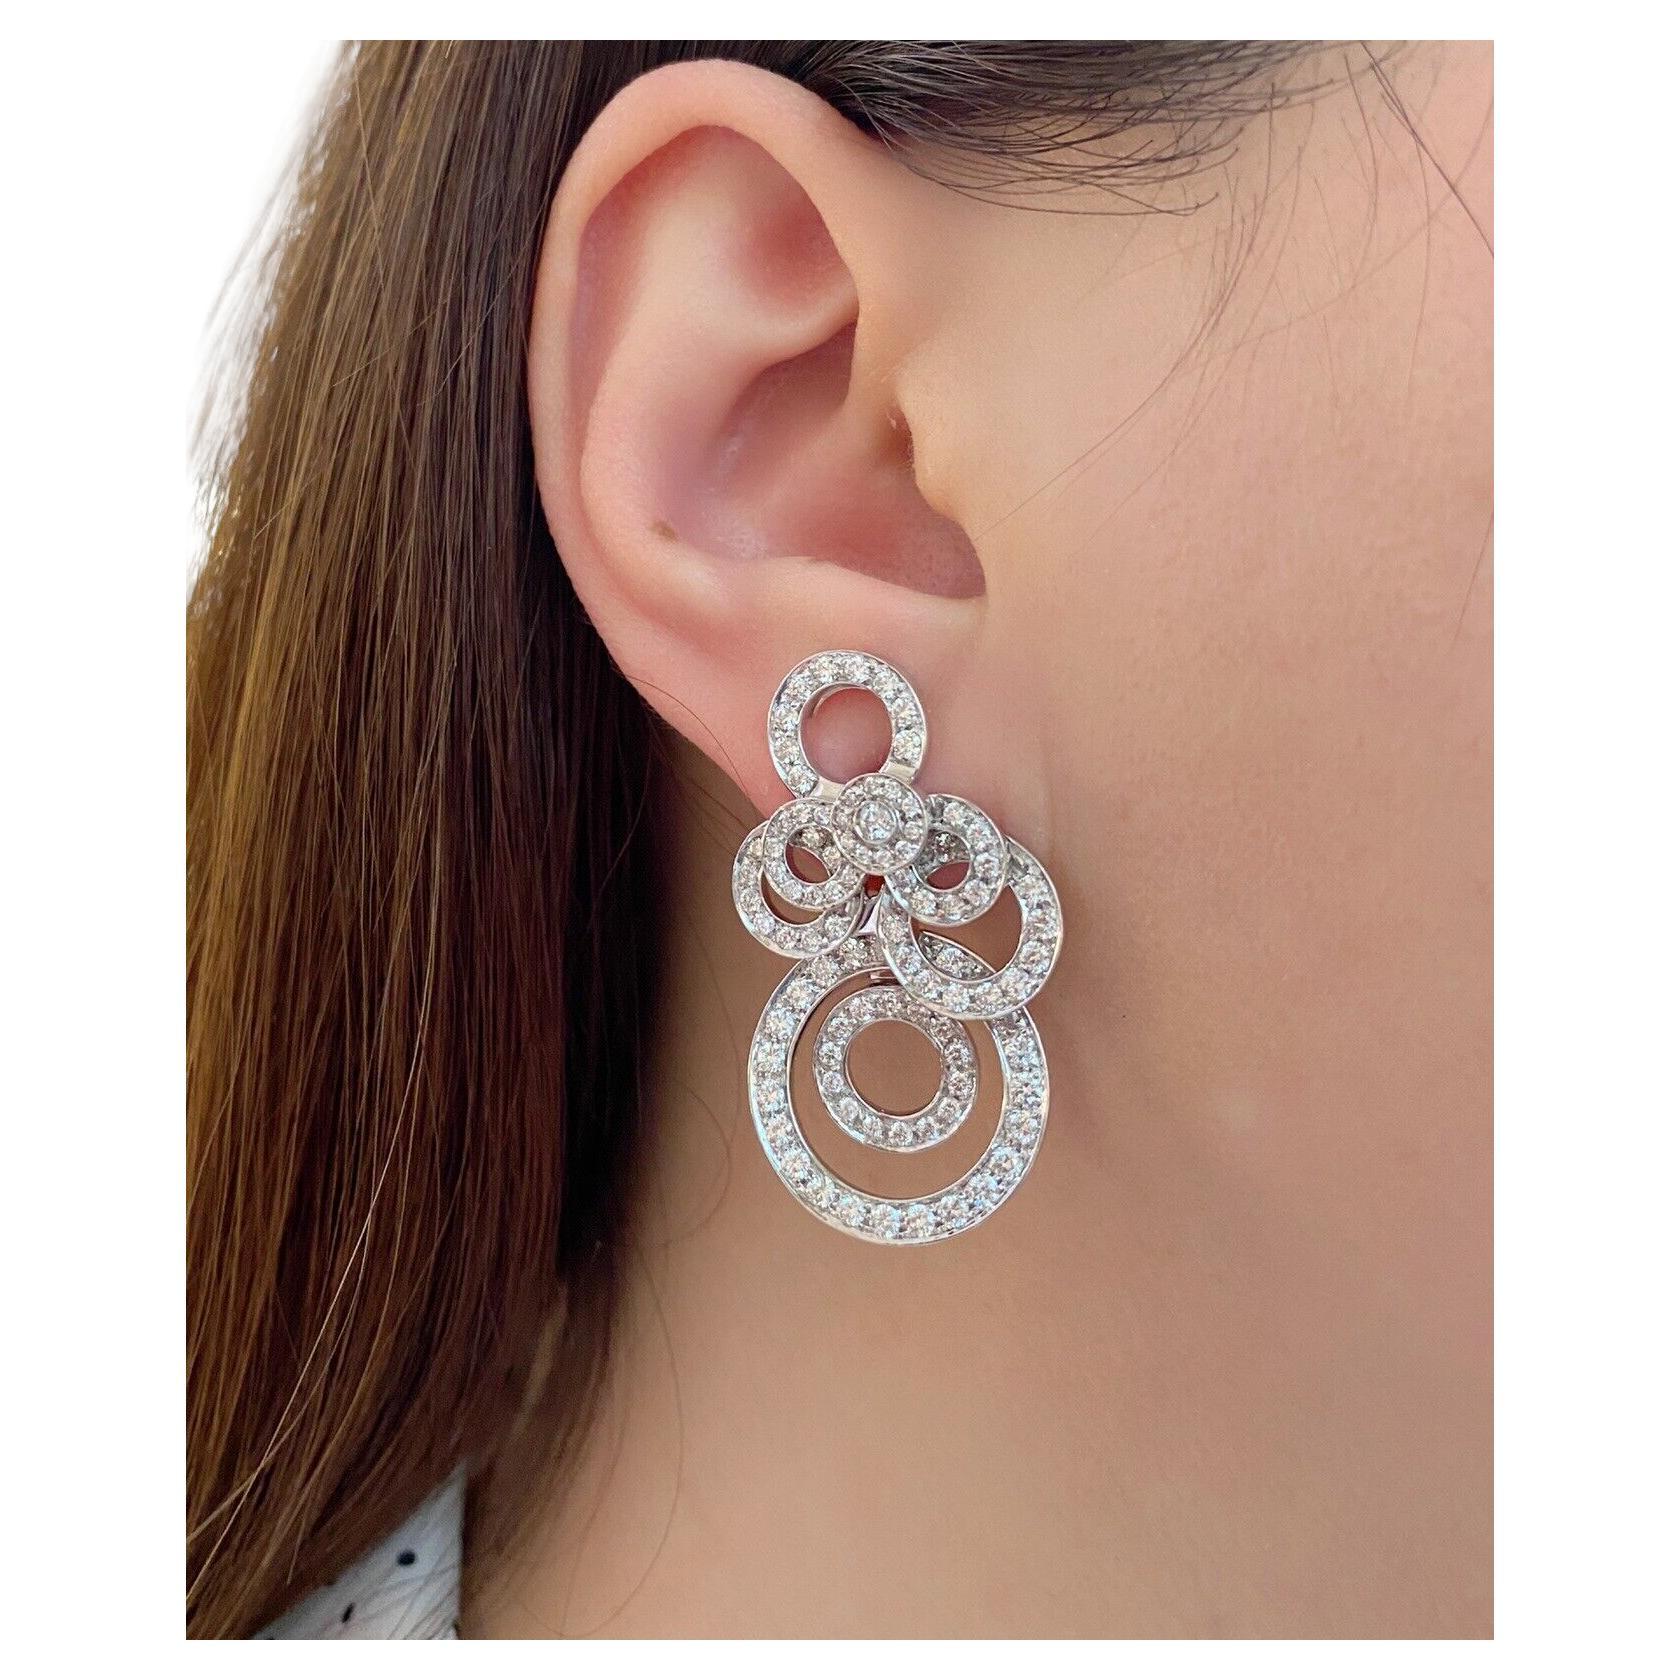 Diamond Circlets Dangle Drop Earrings in 18k White Gold

Diamond Earrings features Circles of Diamonds varying in size set in layers with Round Brilliant Cuts set in 18k White Gold.

Total diamond weight is 4.50 carats.

Earrings measure 1.50 inch